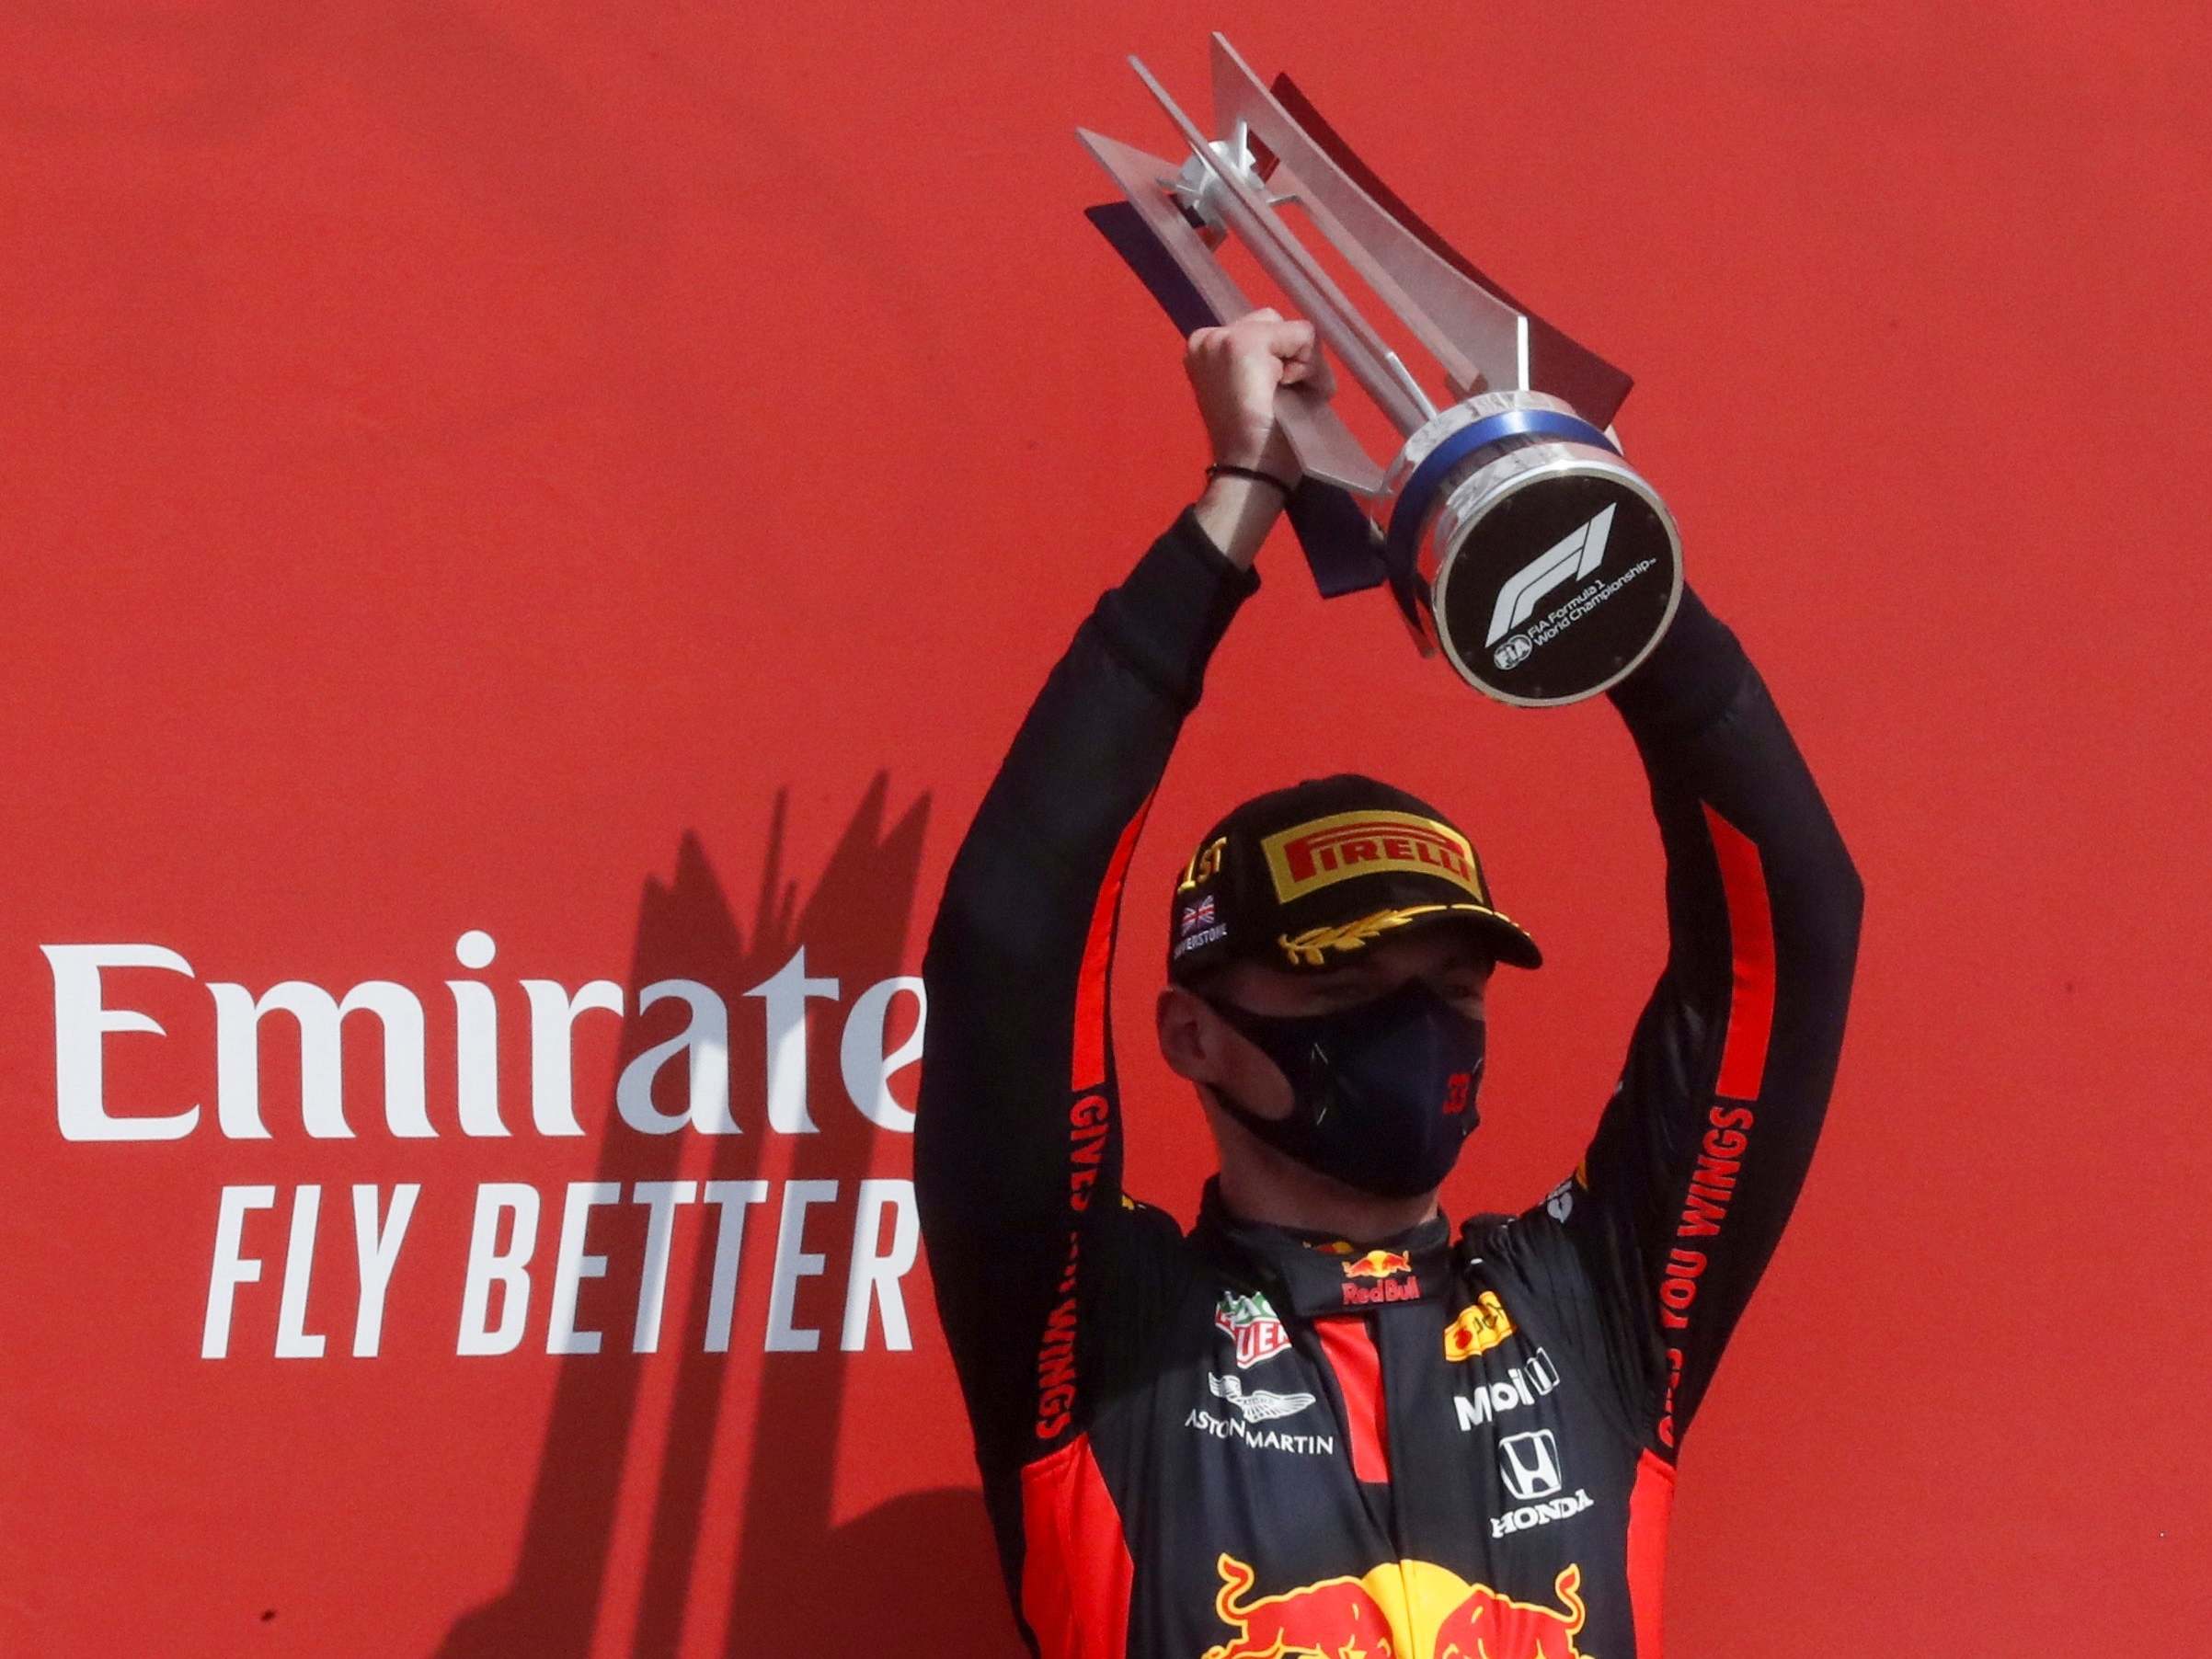 Verstappen clinched a surprise victory at the 70th Anniversary Grand Prix